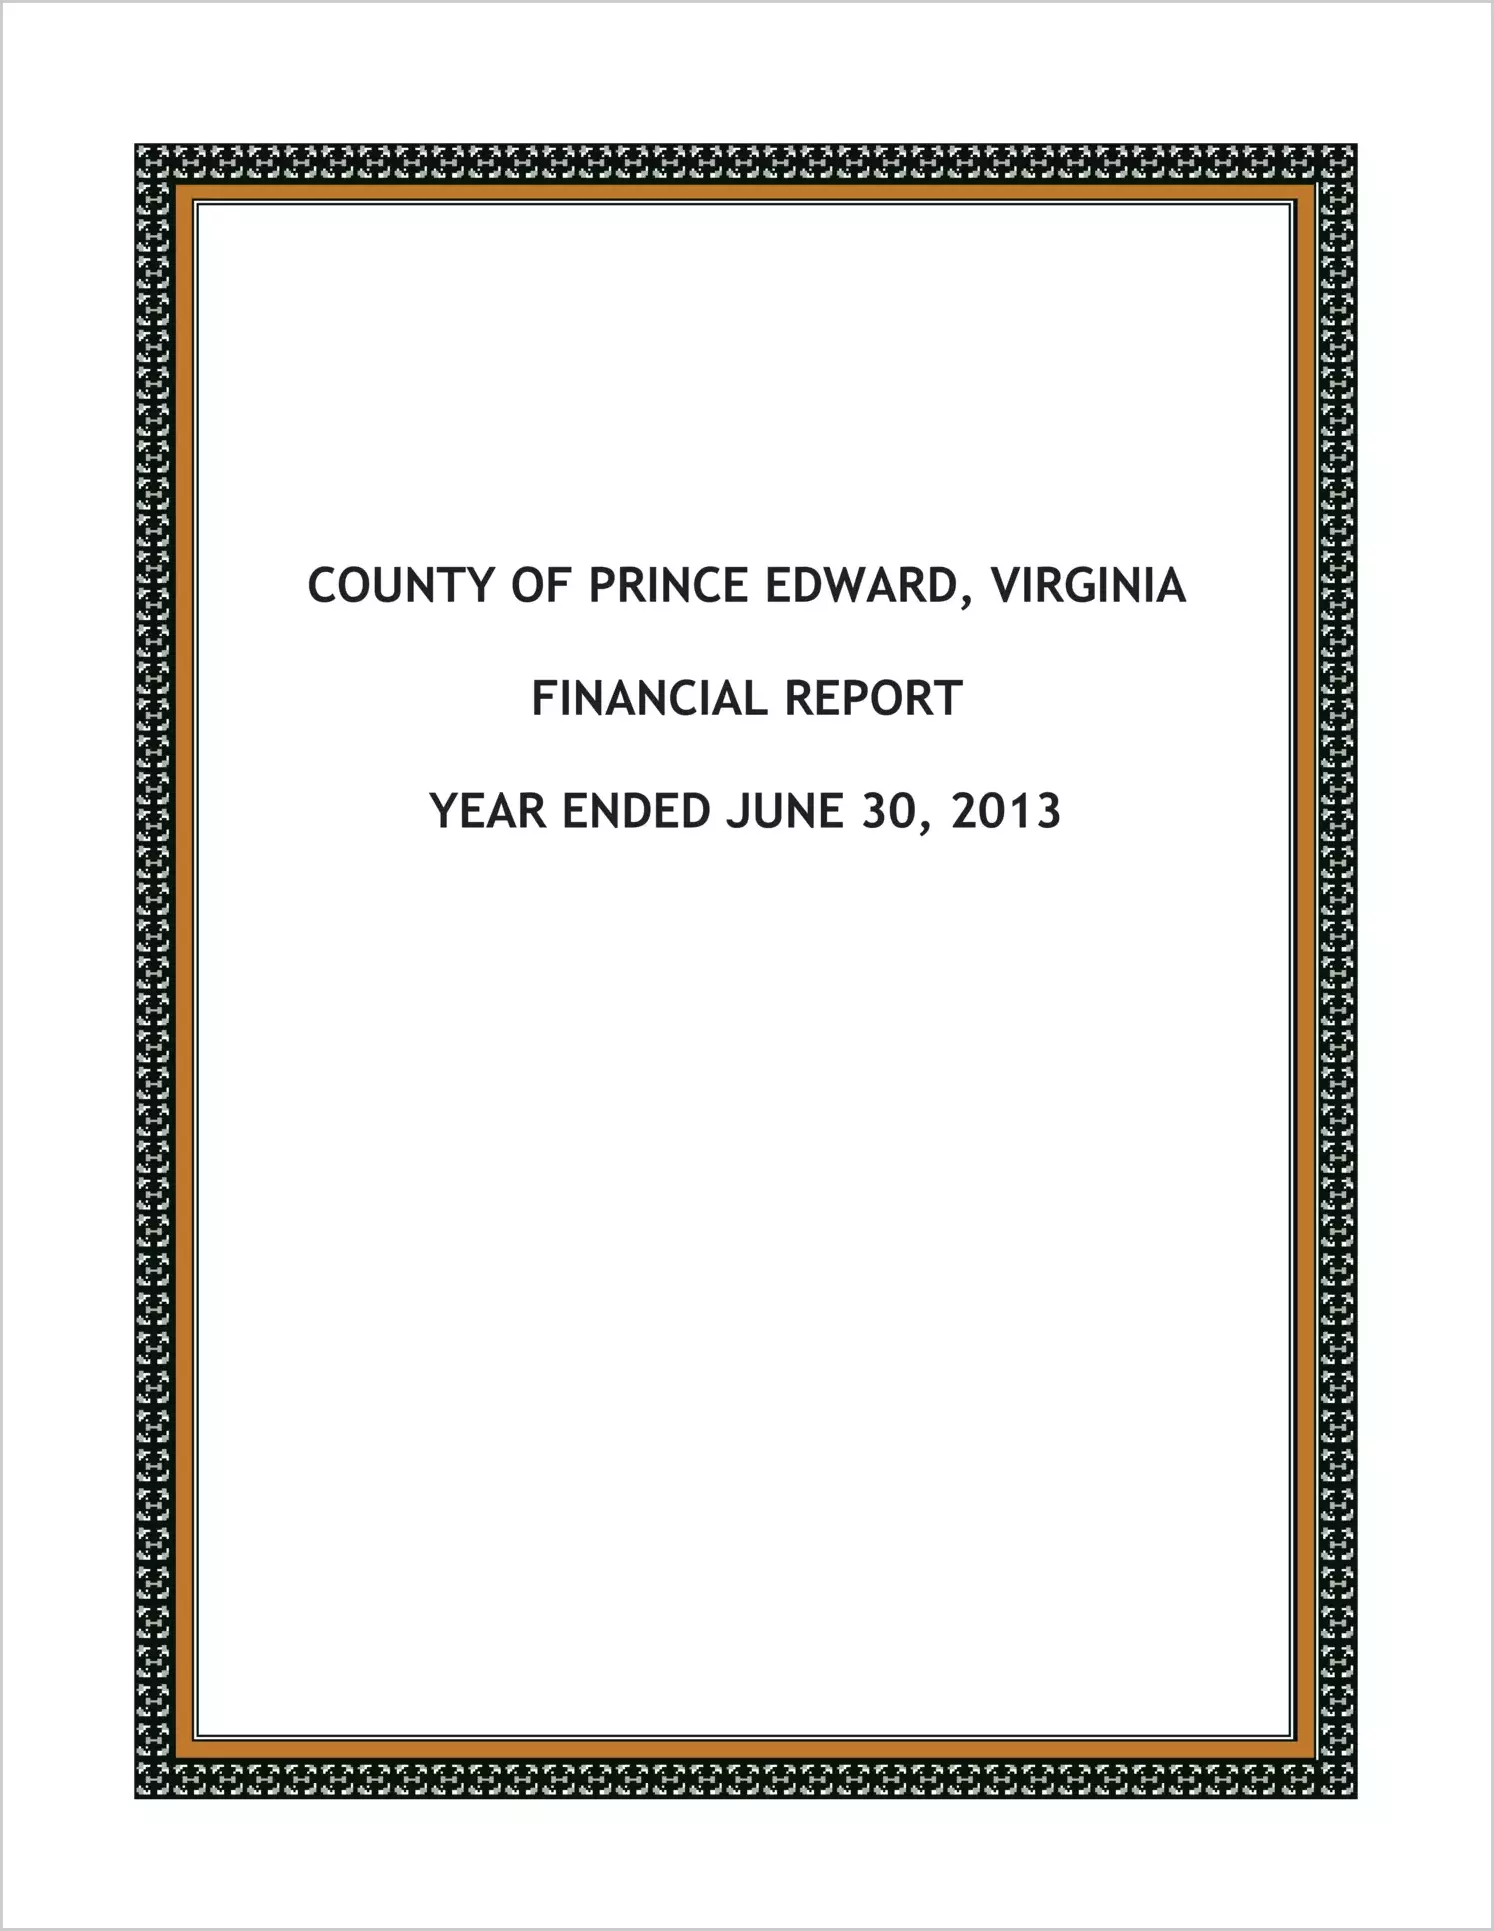 2013 Annual Financial Report for County of Prince Edward